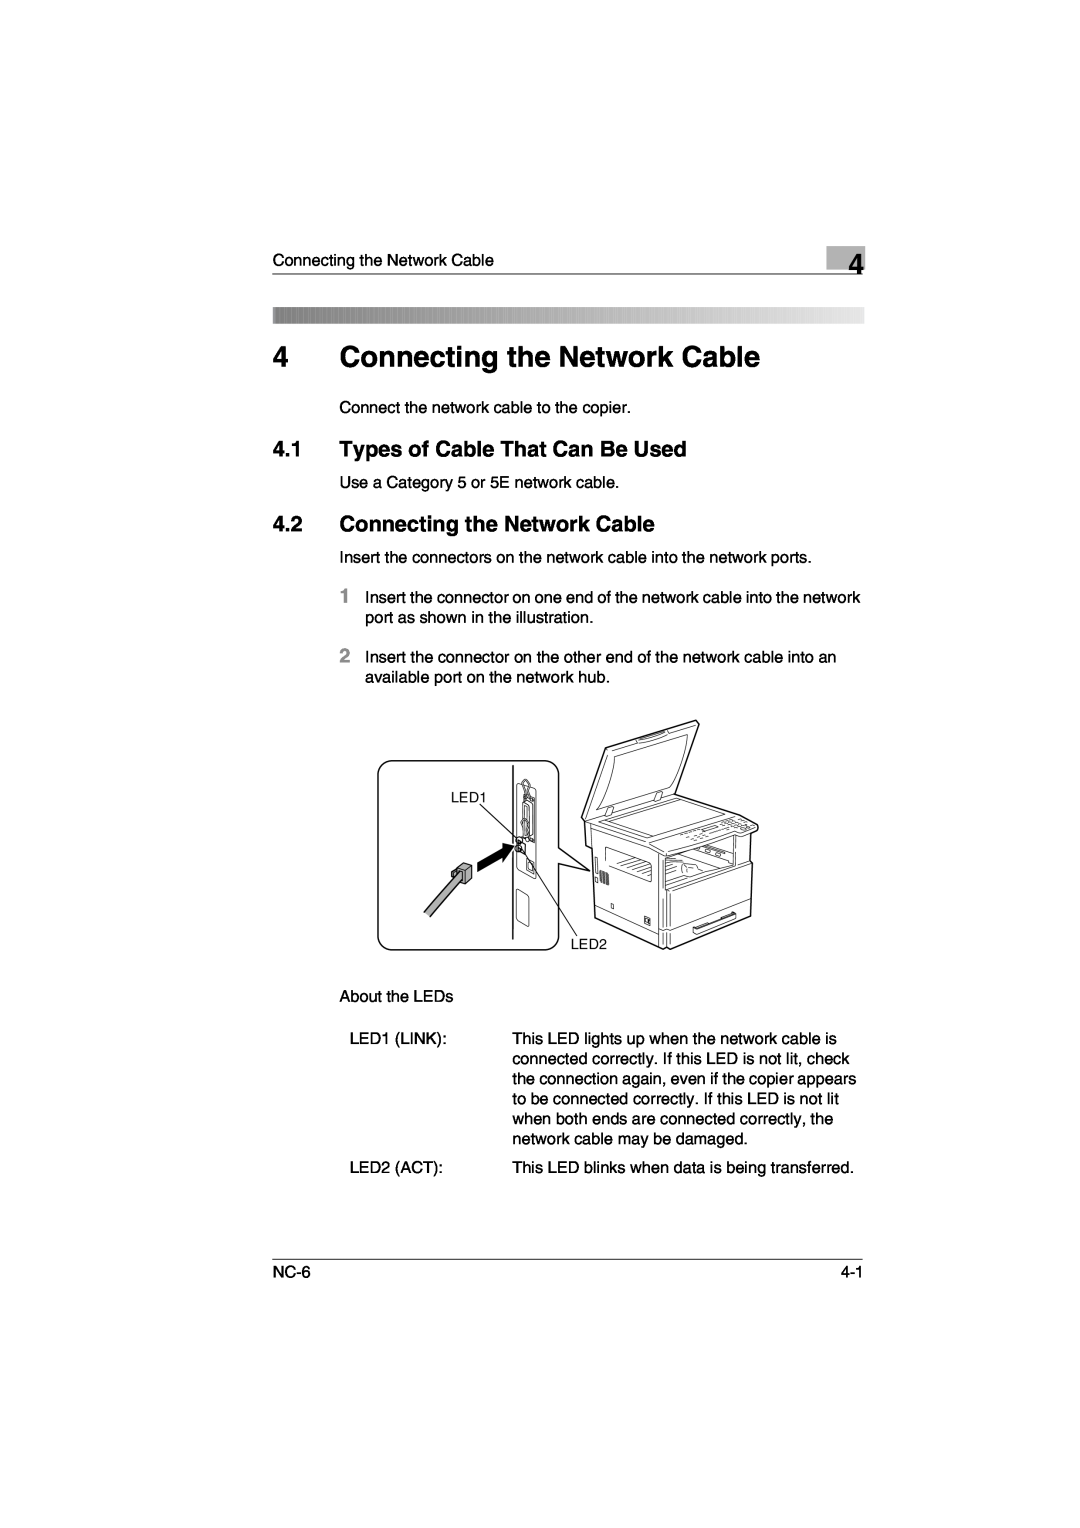 Konica Minolta NC-6 user manual Connecting the Network Cable, Types of Cable That Can Be Used 